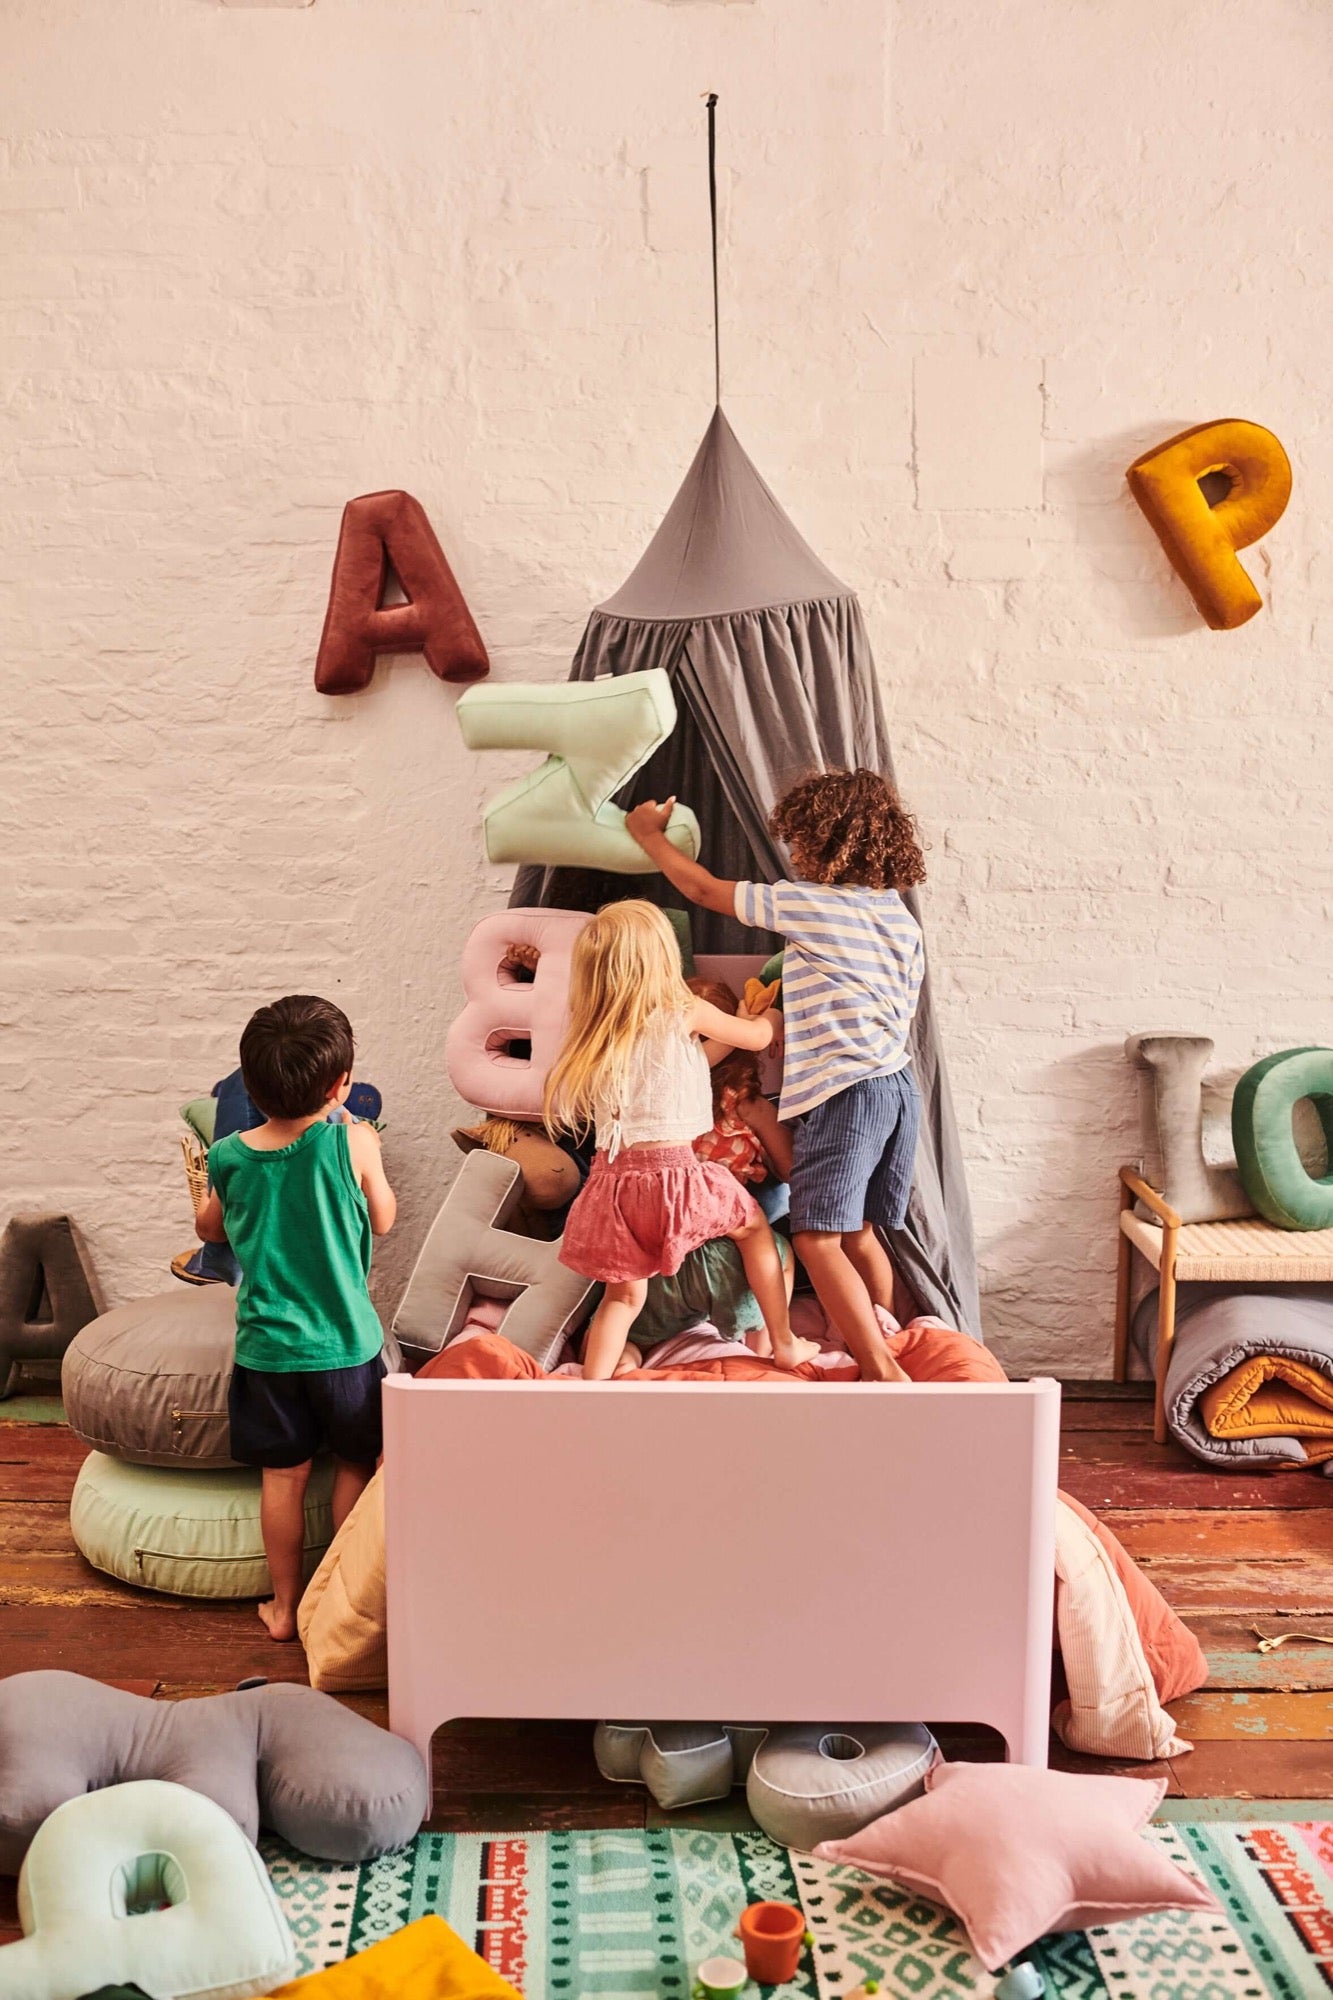 kids playing in kids room with velvet letter cushions. Over the bed is grey canopy by bettys home